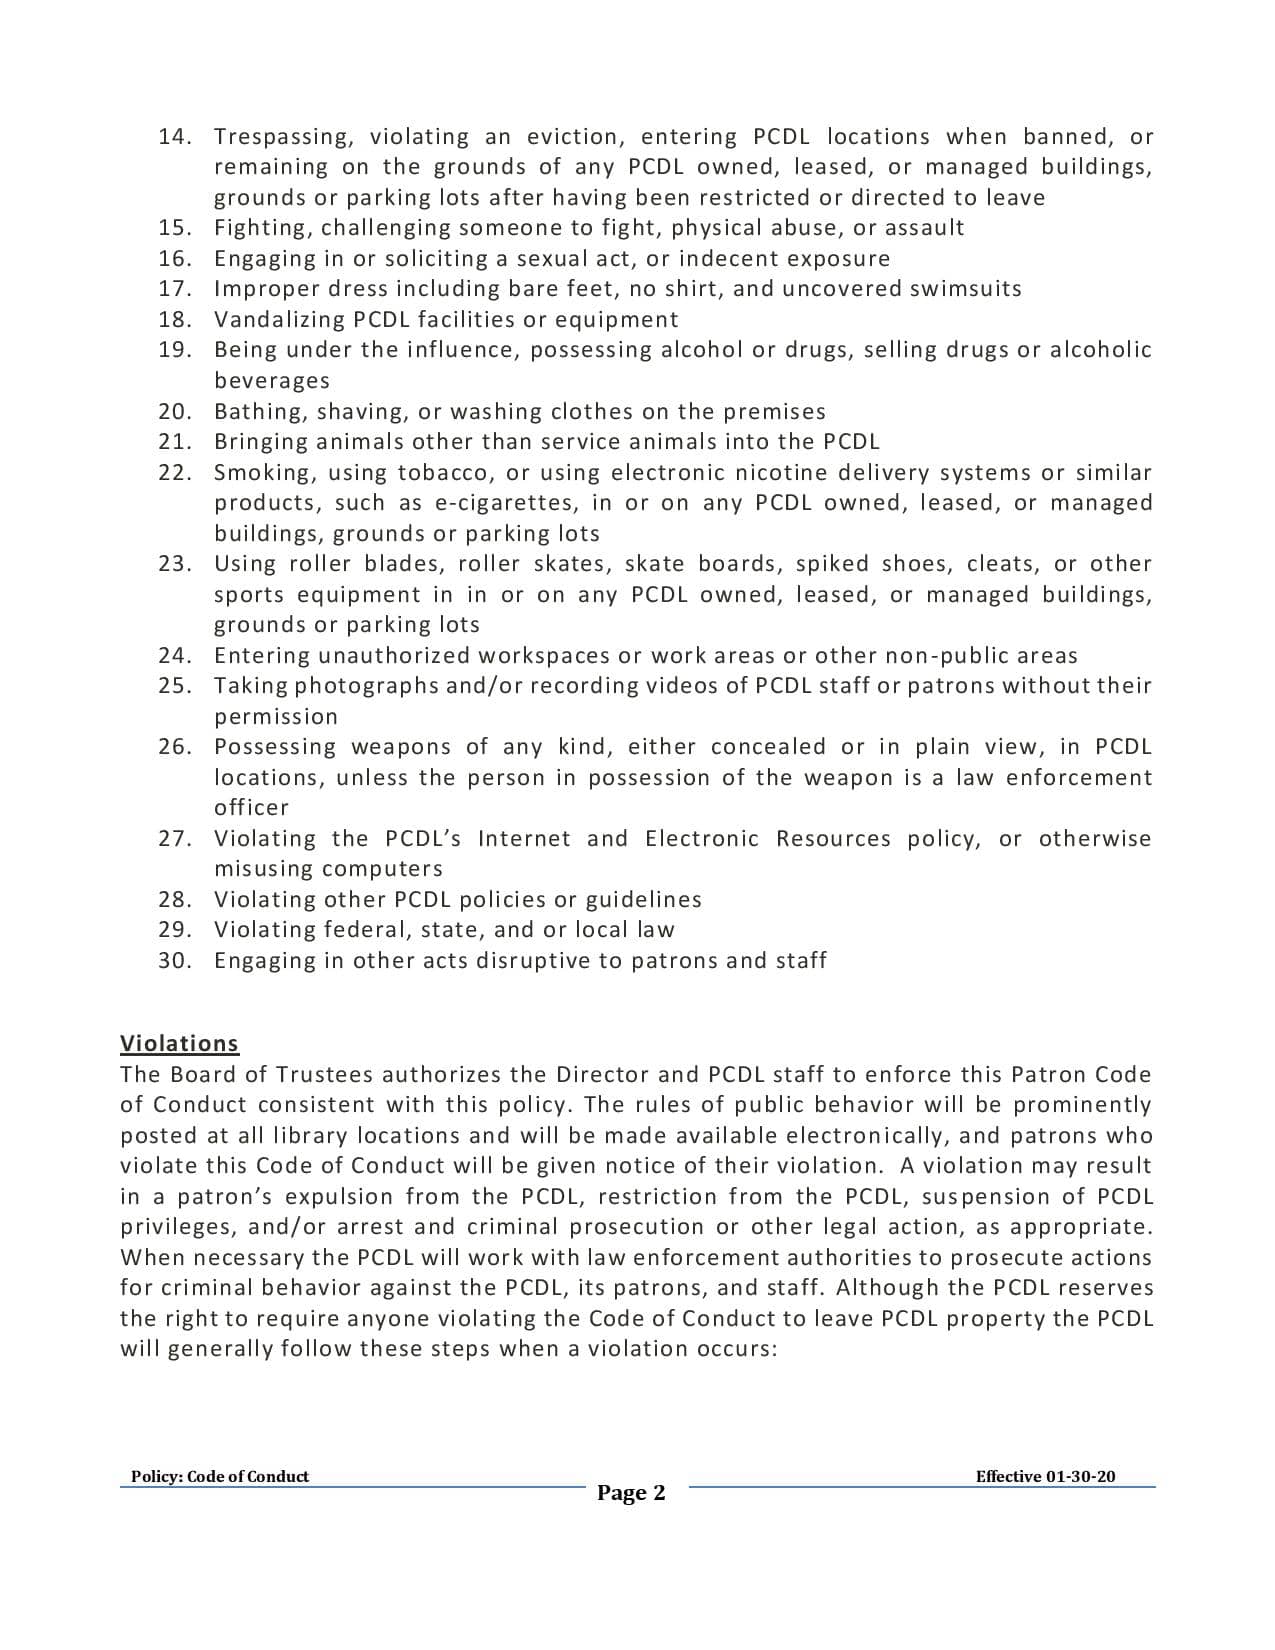 Code of Conduct Page 2